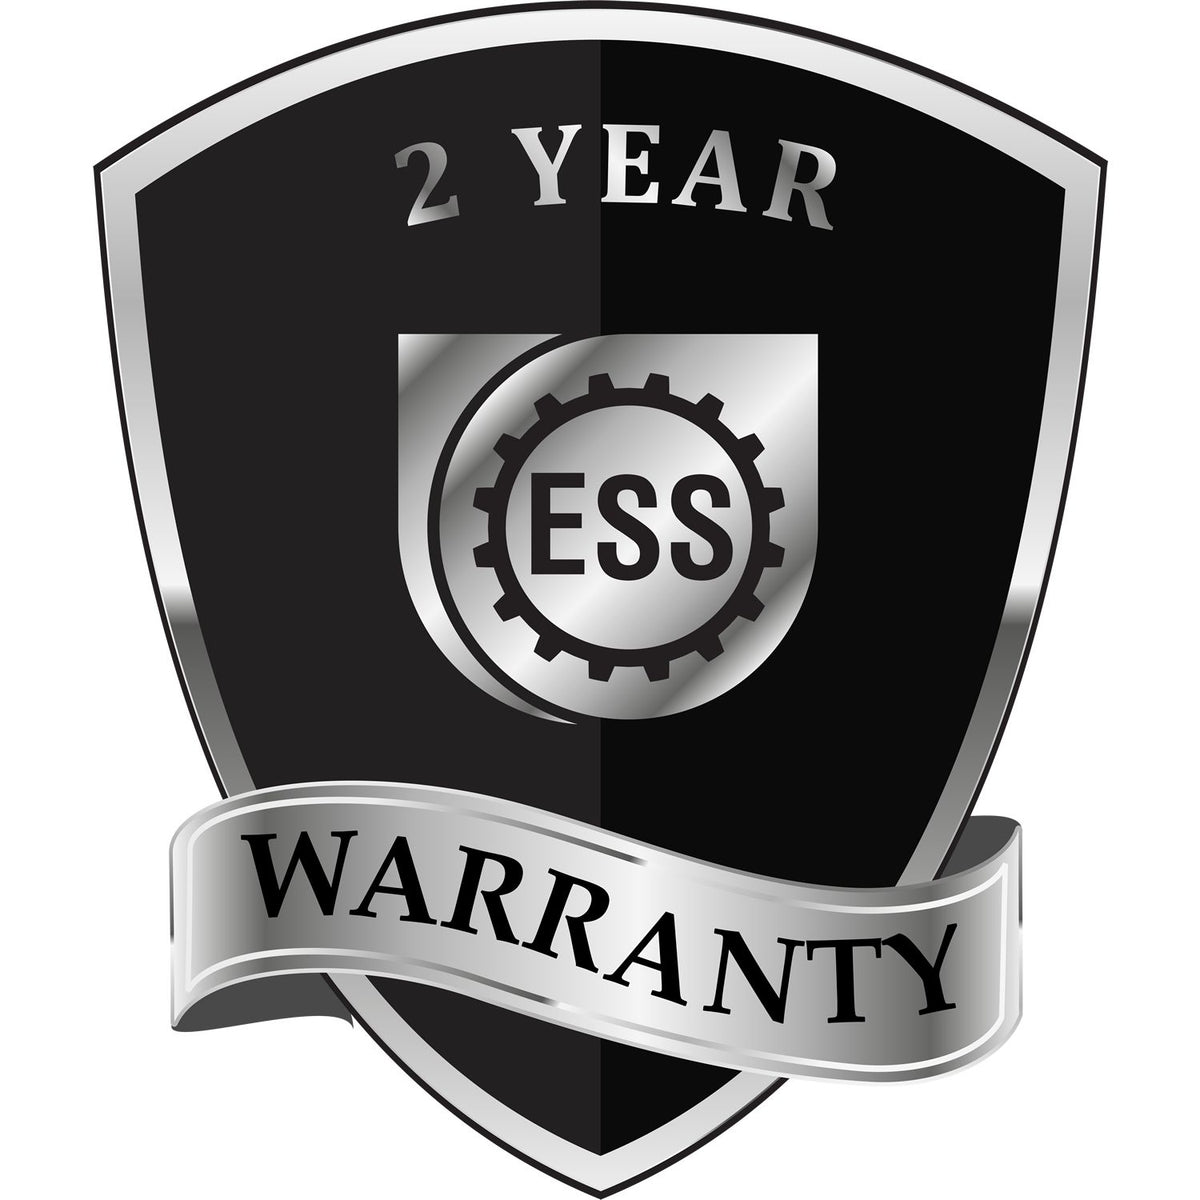 A black and silver badge or emblem showing warranty information for the State of Guam Extended Long Reach Geologist Seal